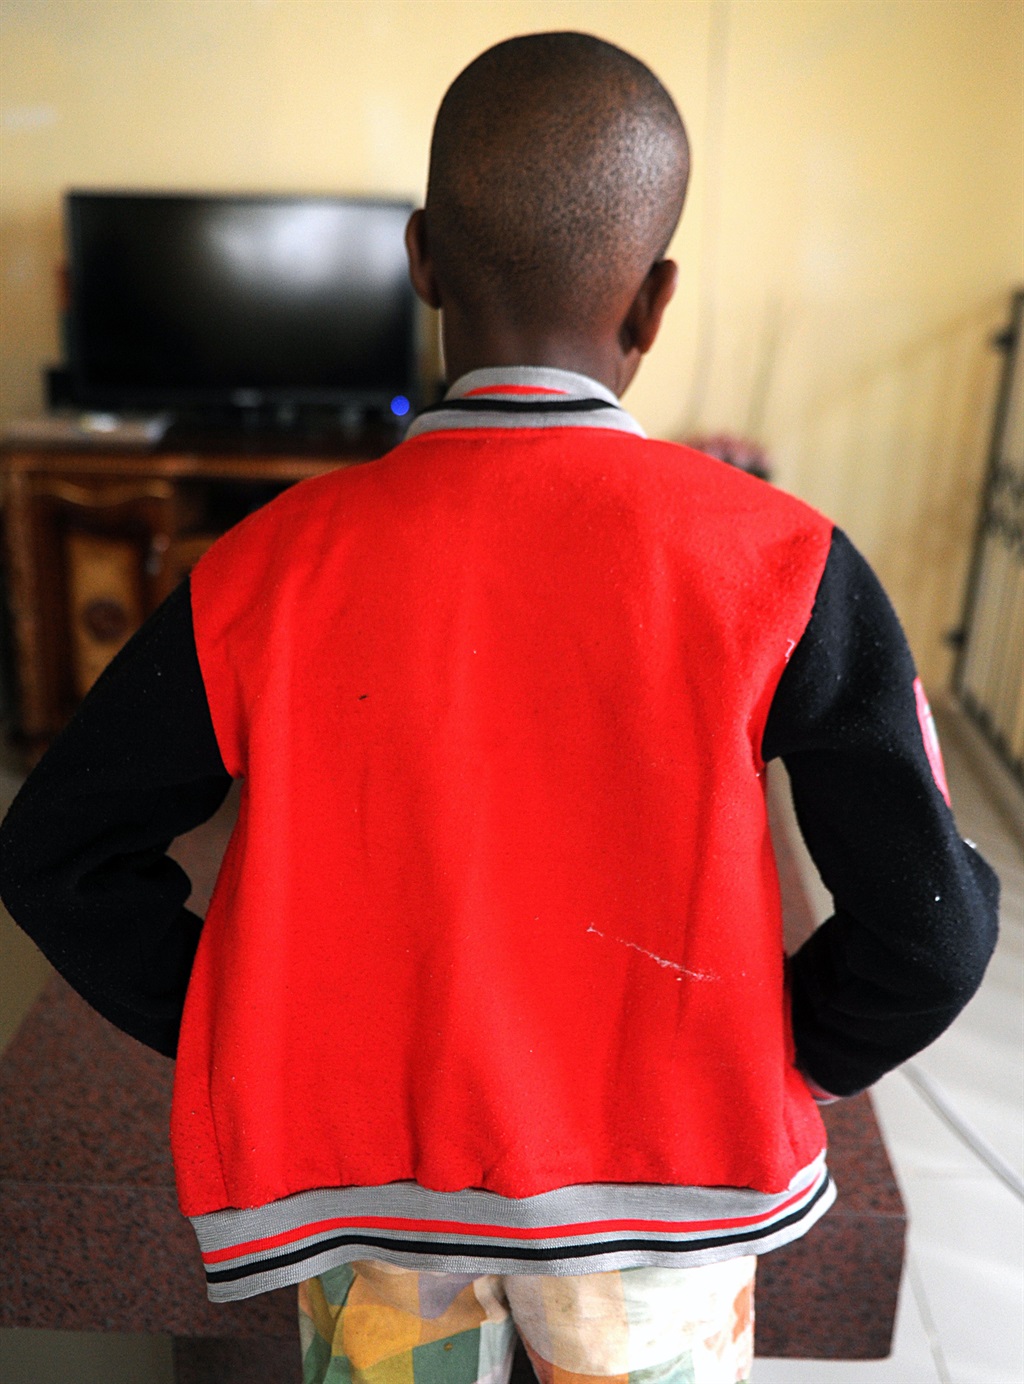 A grade three boy who was allegedly expelled from Mariannridge Primary School. Photo by Jabulani Langa